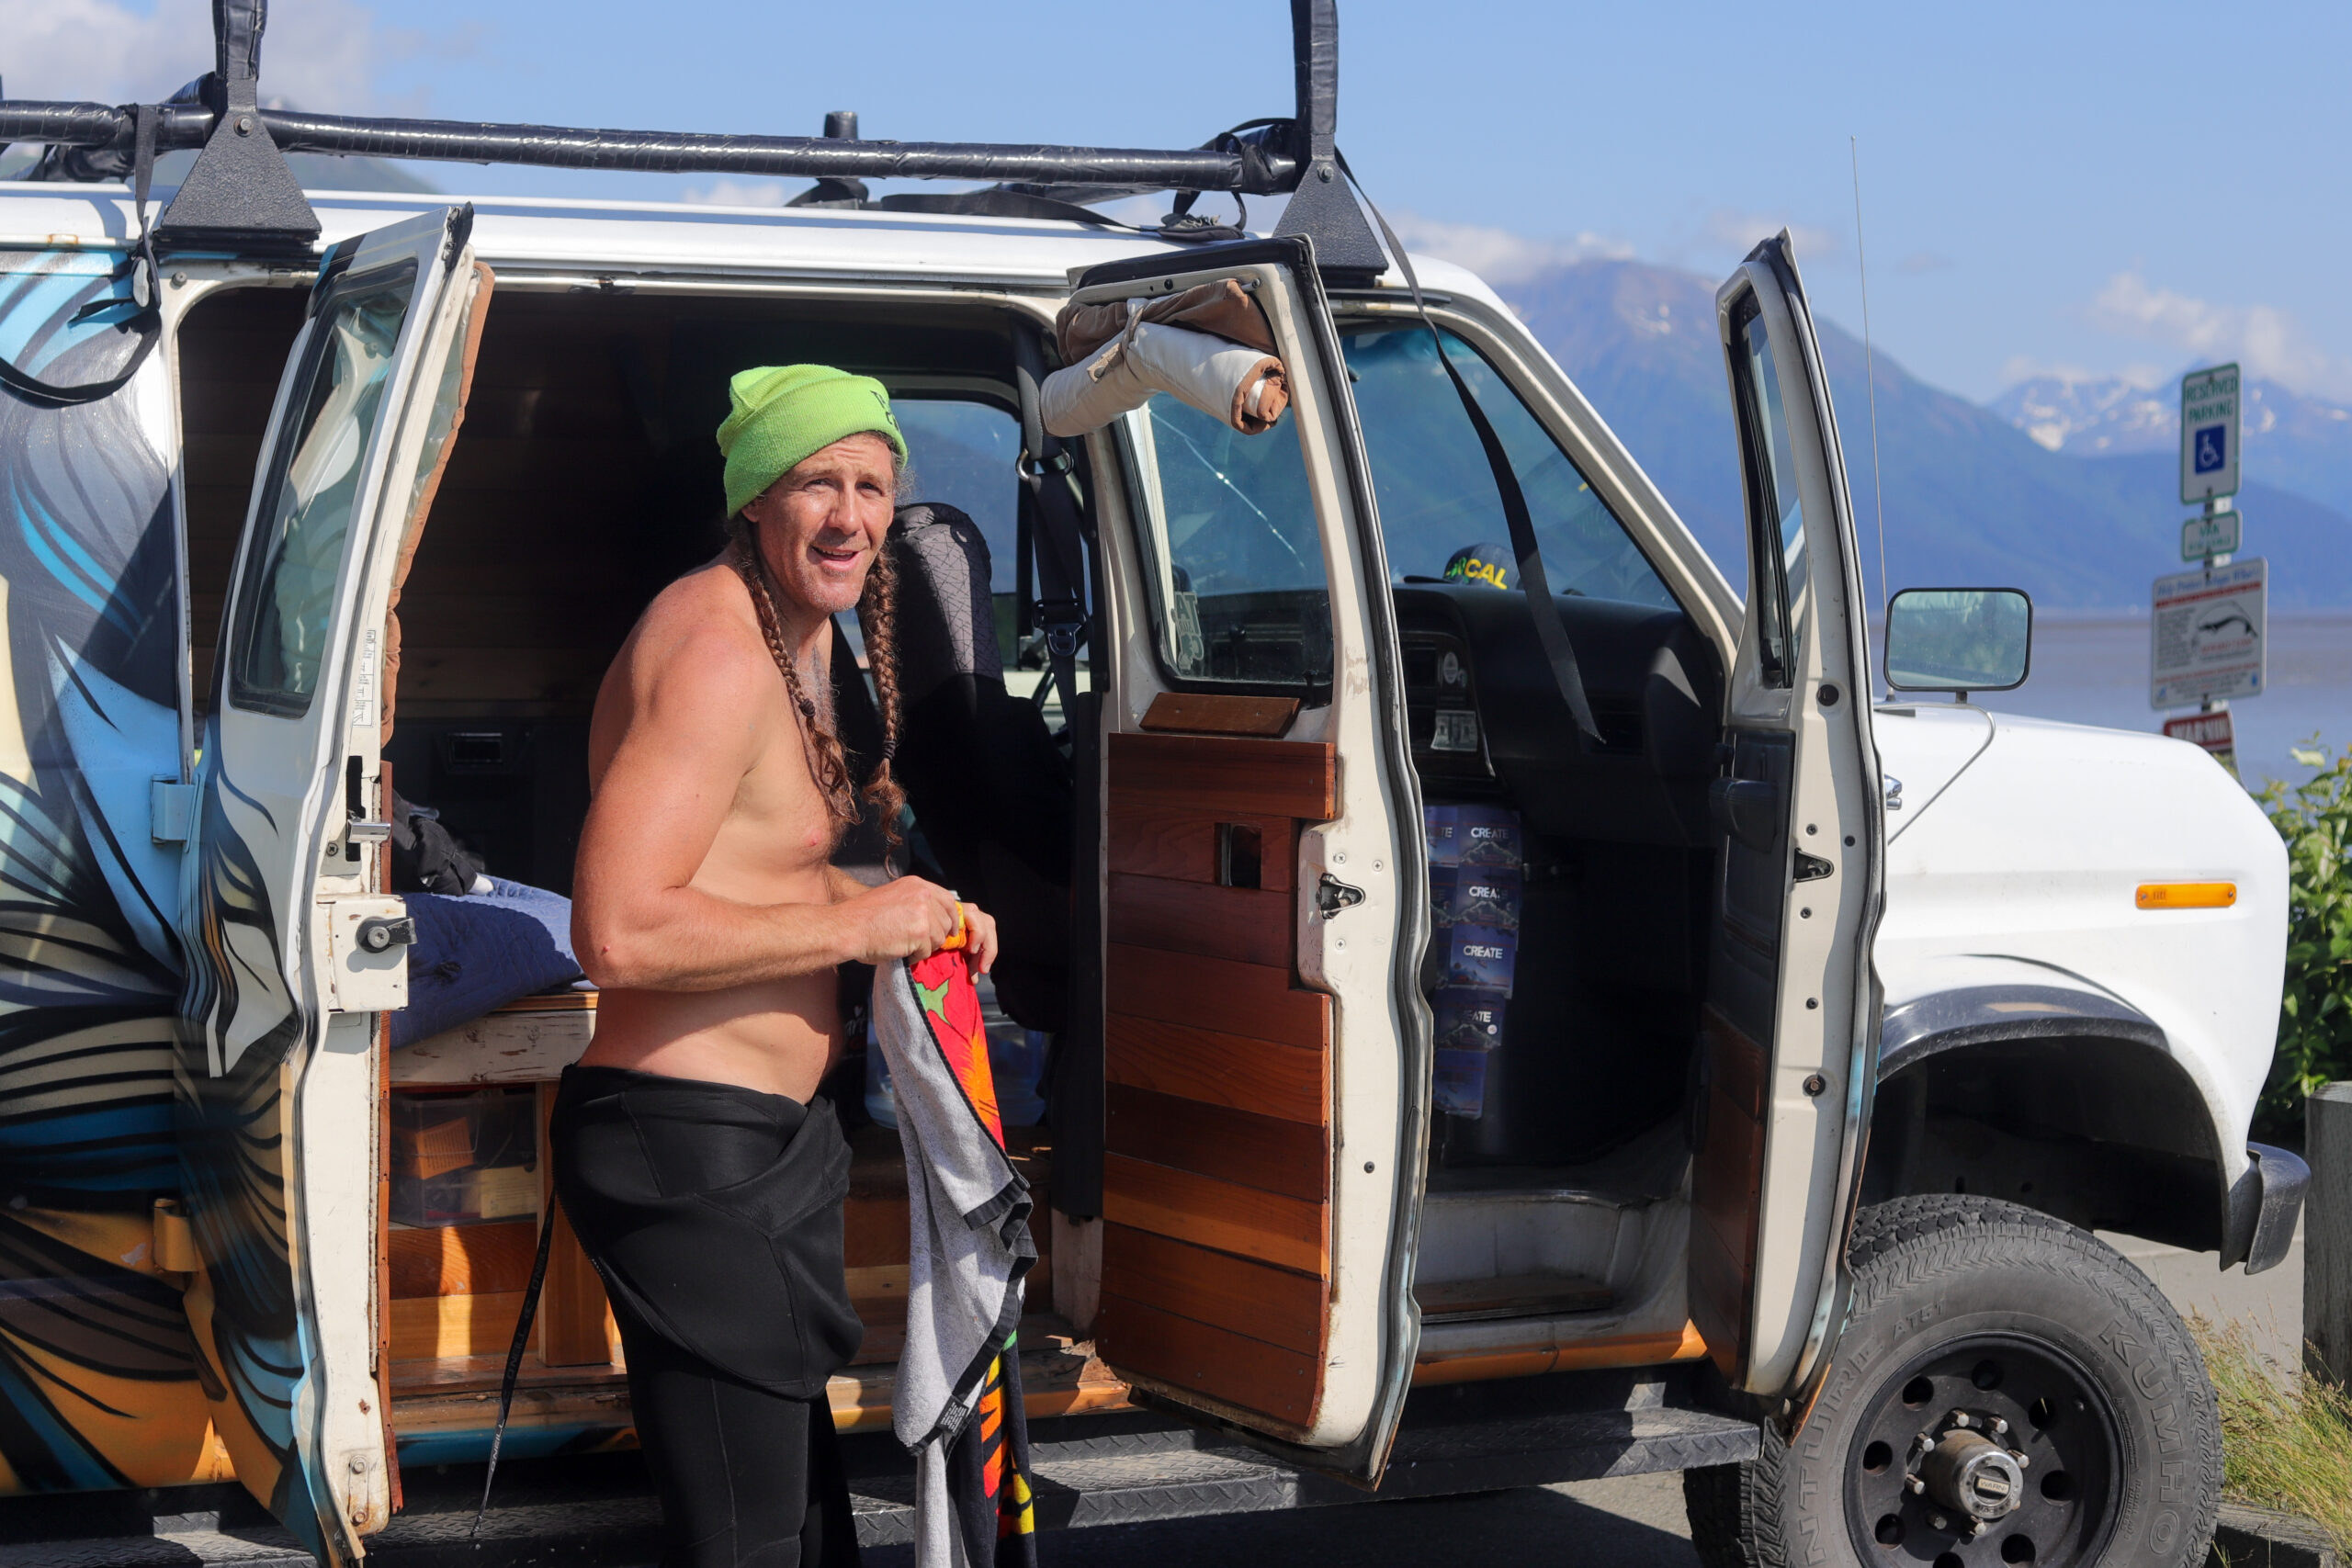 A man in a wetsuit and beanie stands next to a van, holding a towel.